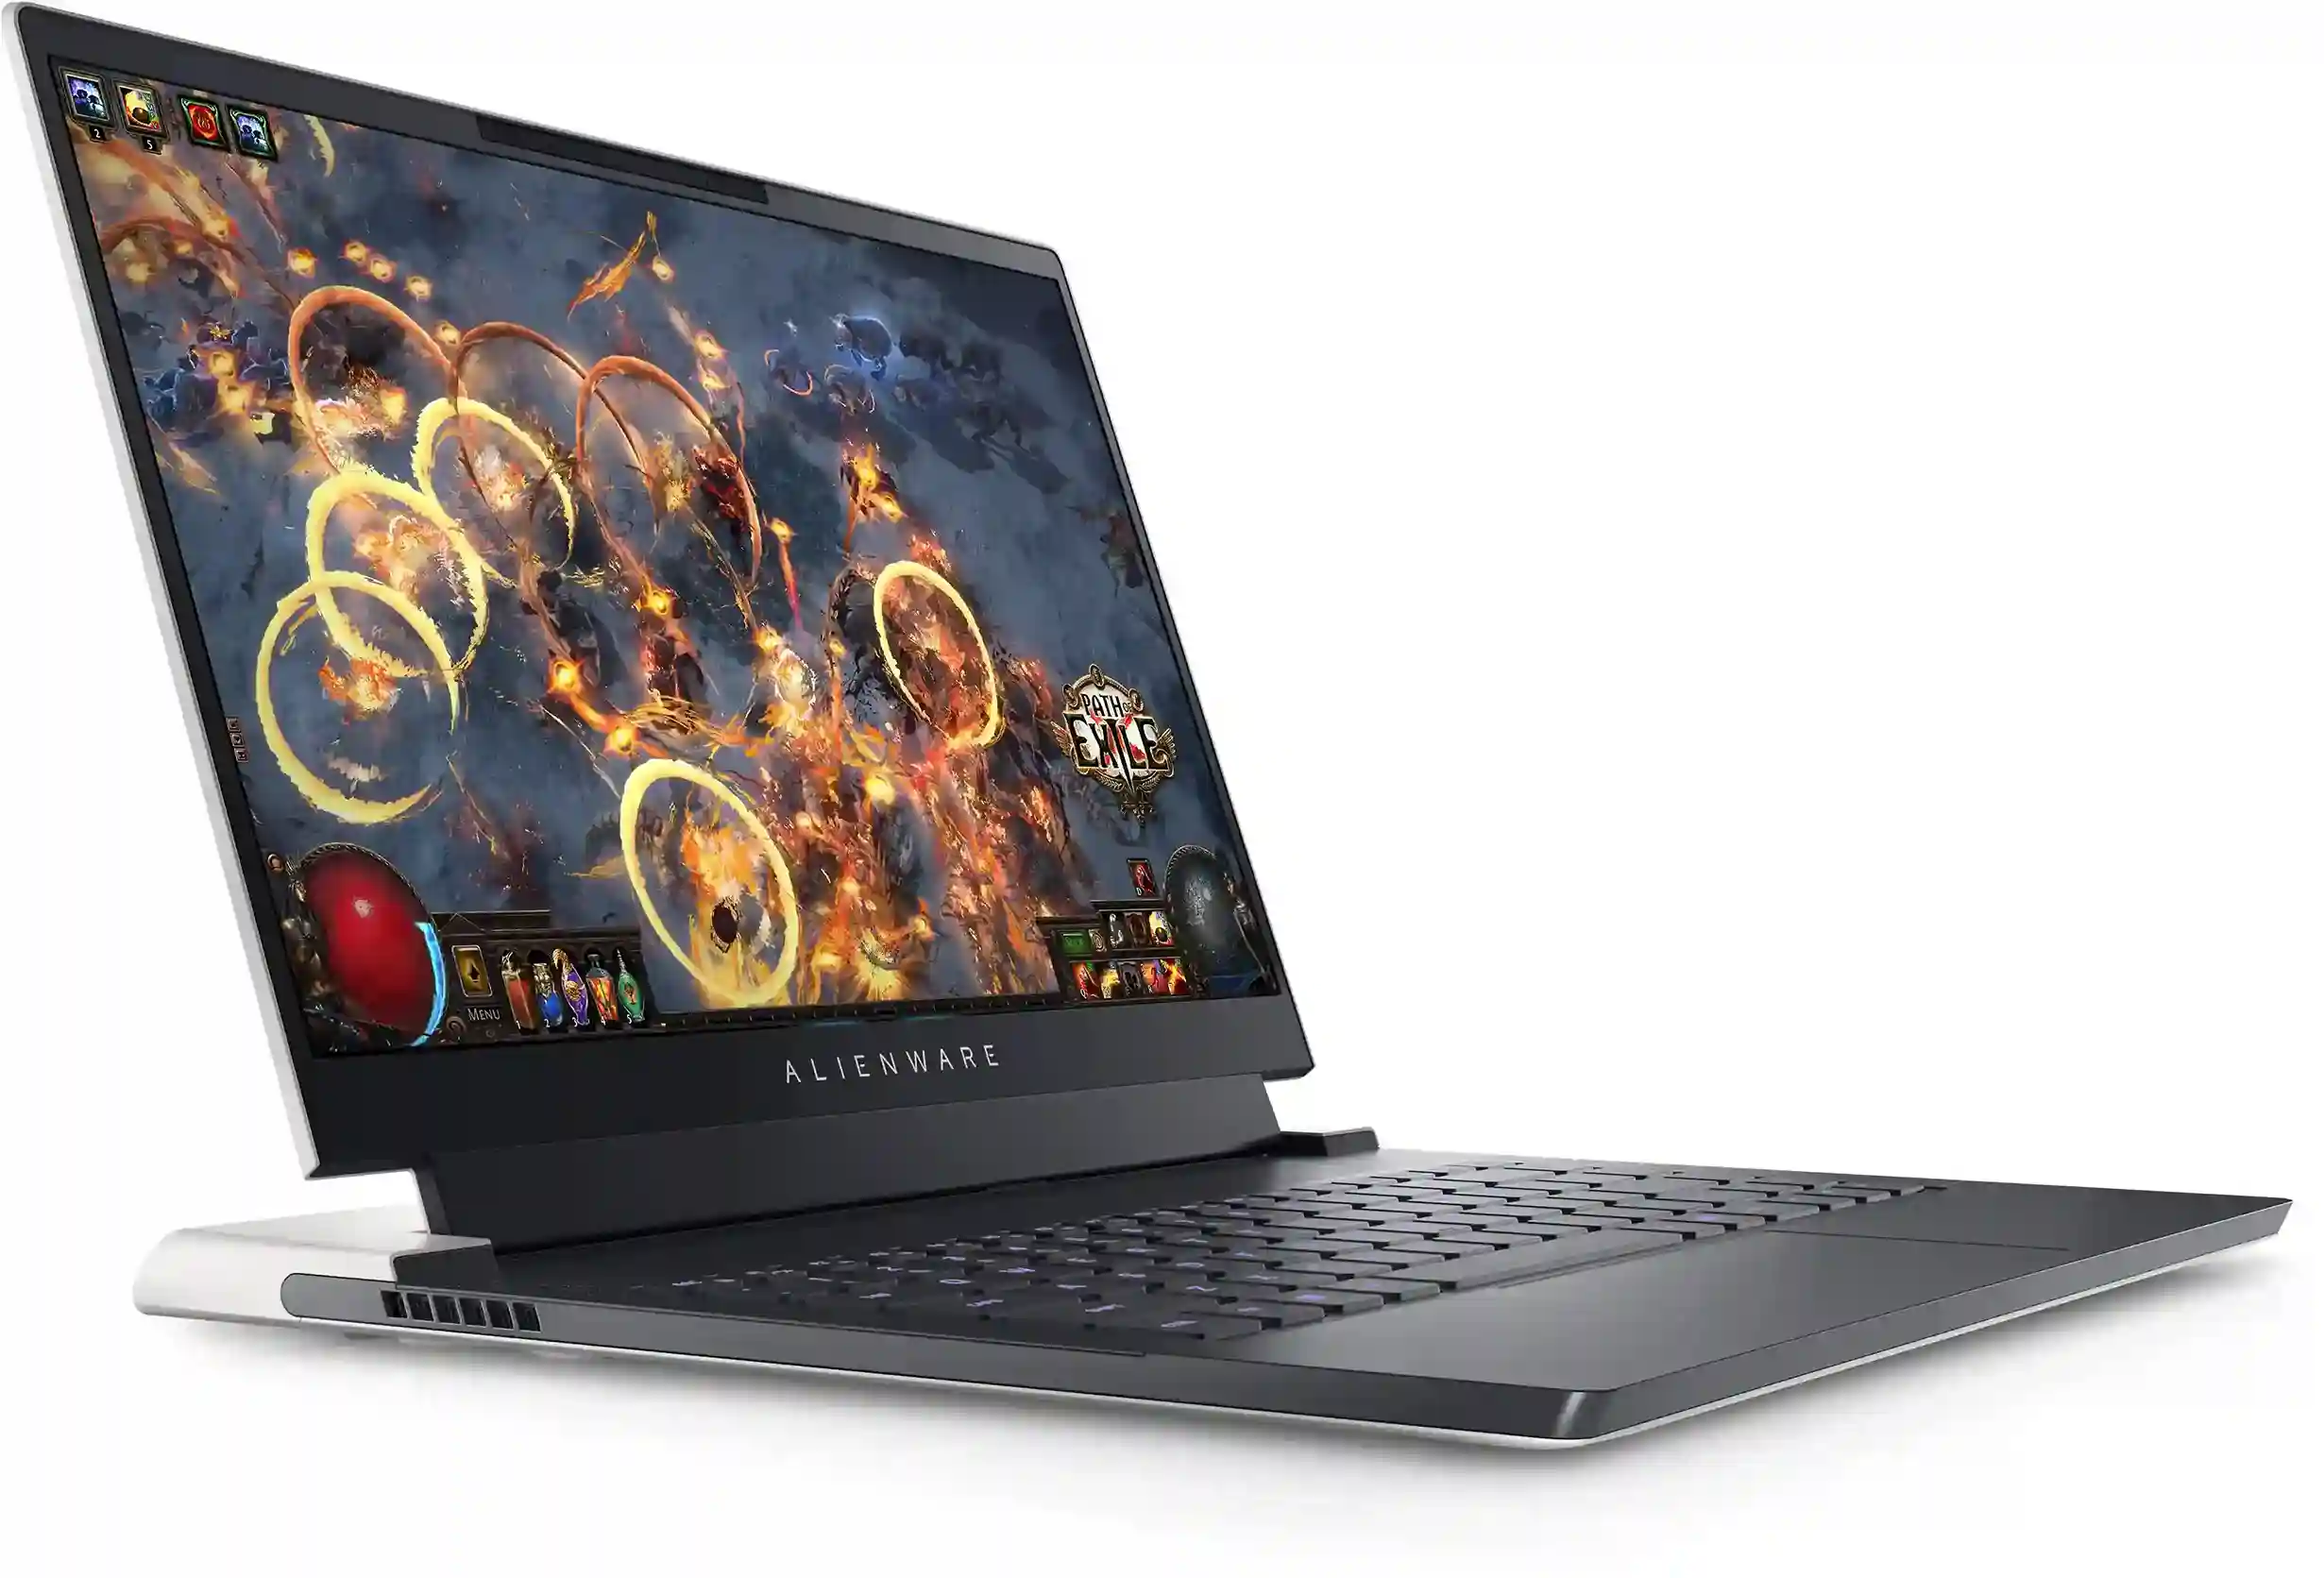 Alienware x14 – World’s thinnest 14-inch gaming laptop.